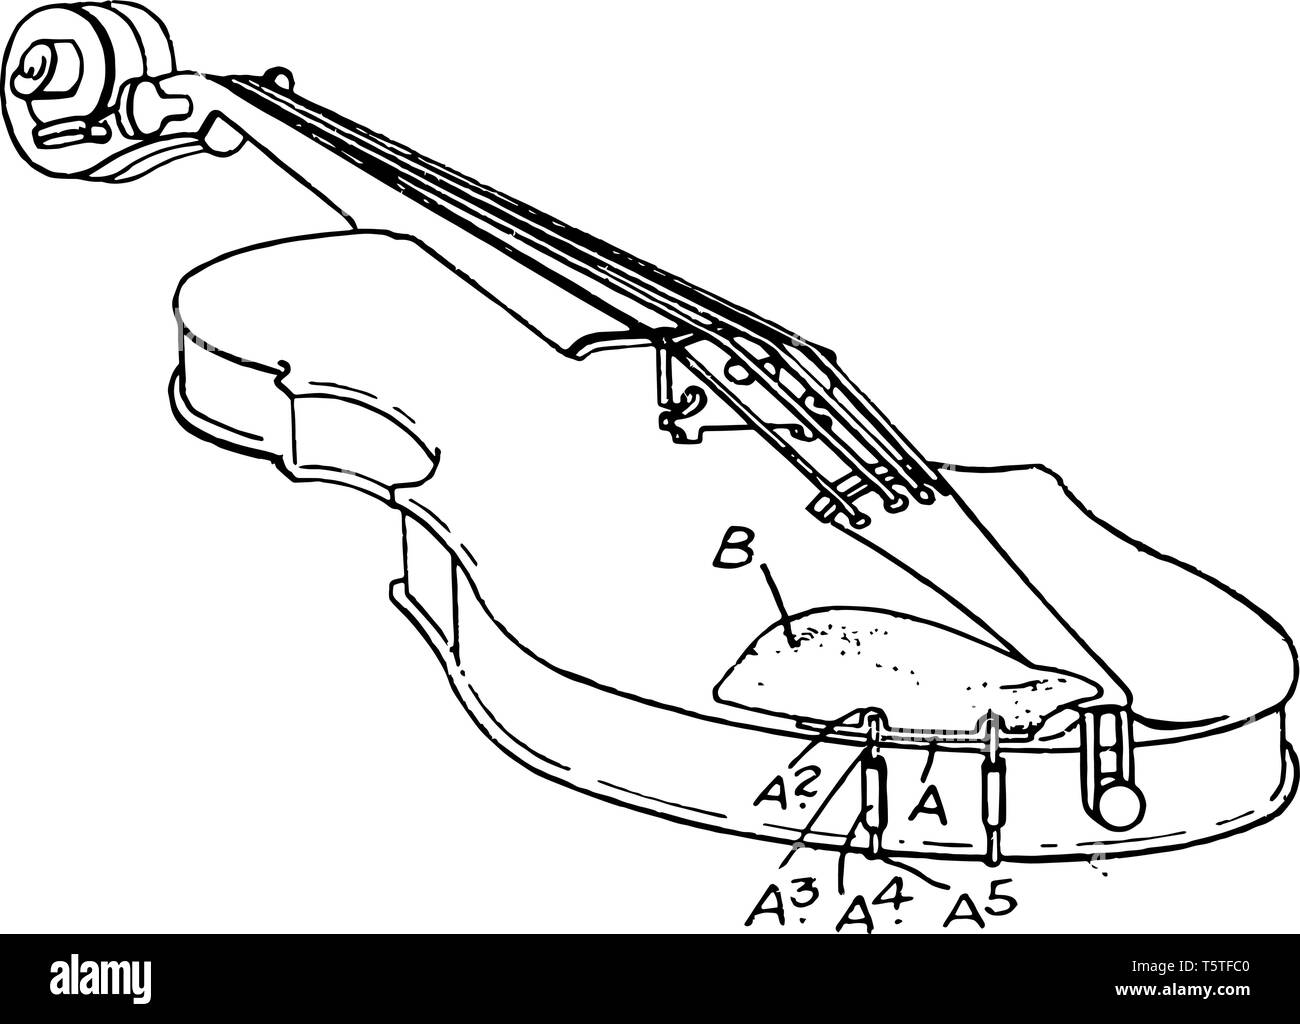 Musical Violin held nearly horizontal by the player arm with the lower part supported against the collarbone or shoulder, vintage line drawing or engr Stock Vector